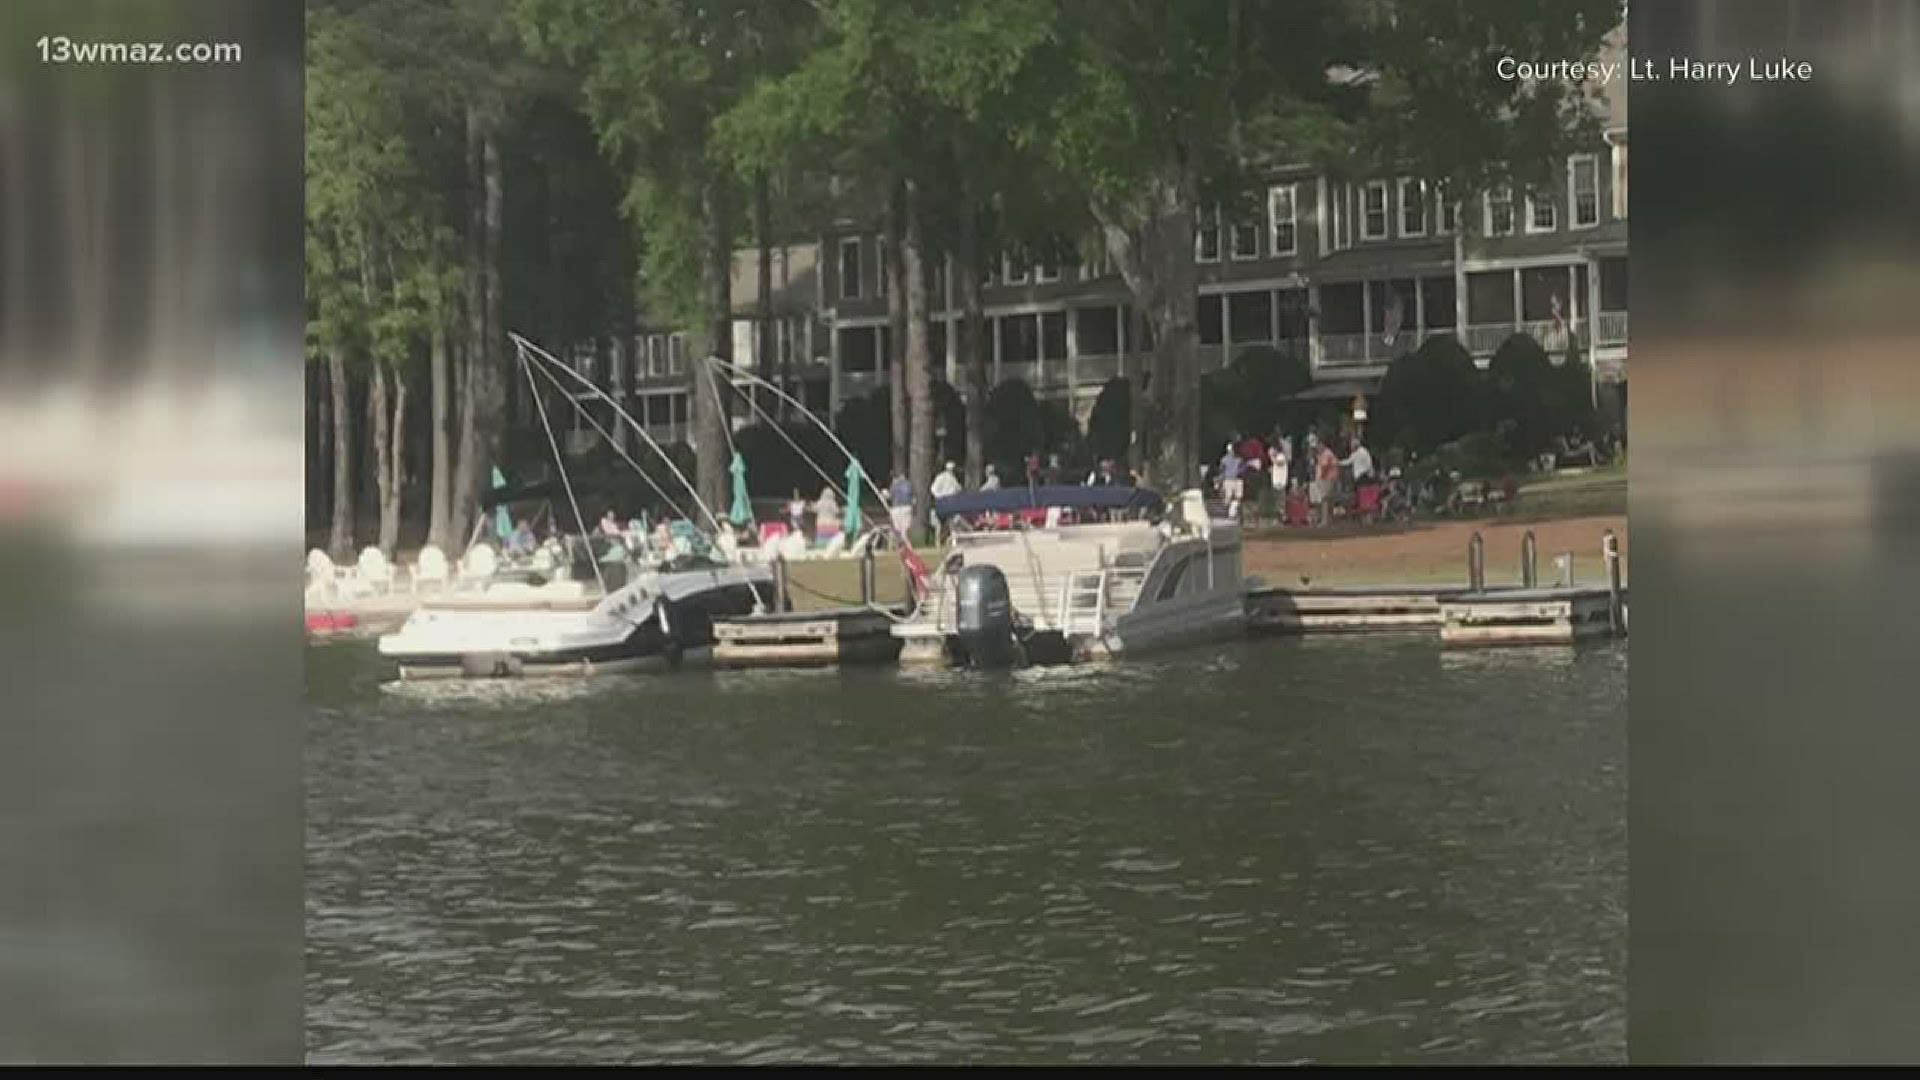 The Putnam County Sheriff's Office typically starts patrolling lakes Oconee and Sinclair sometime around Memorial Day. This year, they had to start in mid-March.